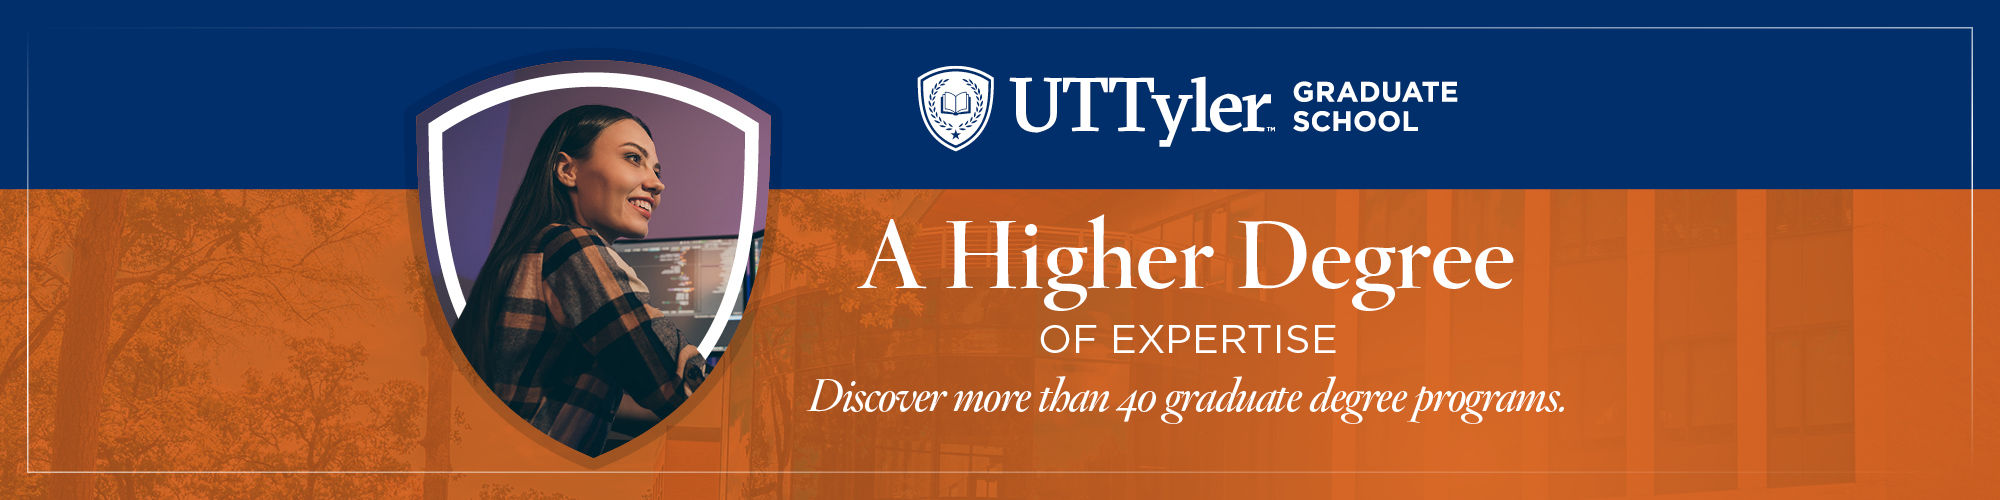 A Higher Degree of Expertise - Discover more than 40 graduate degree programs.